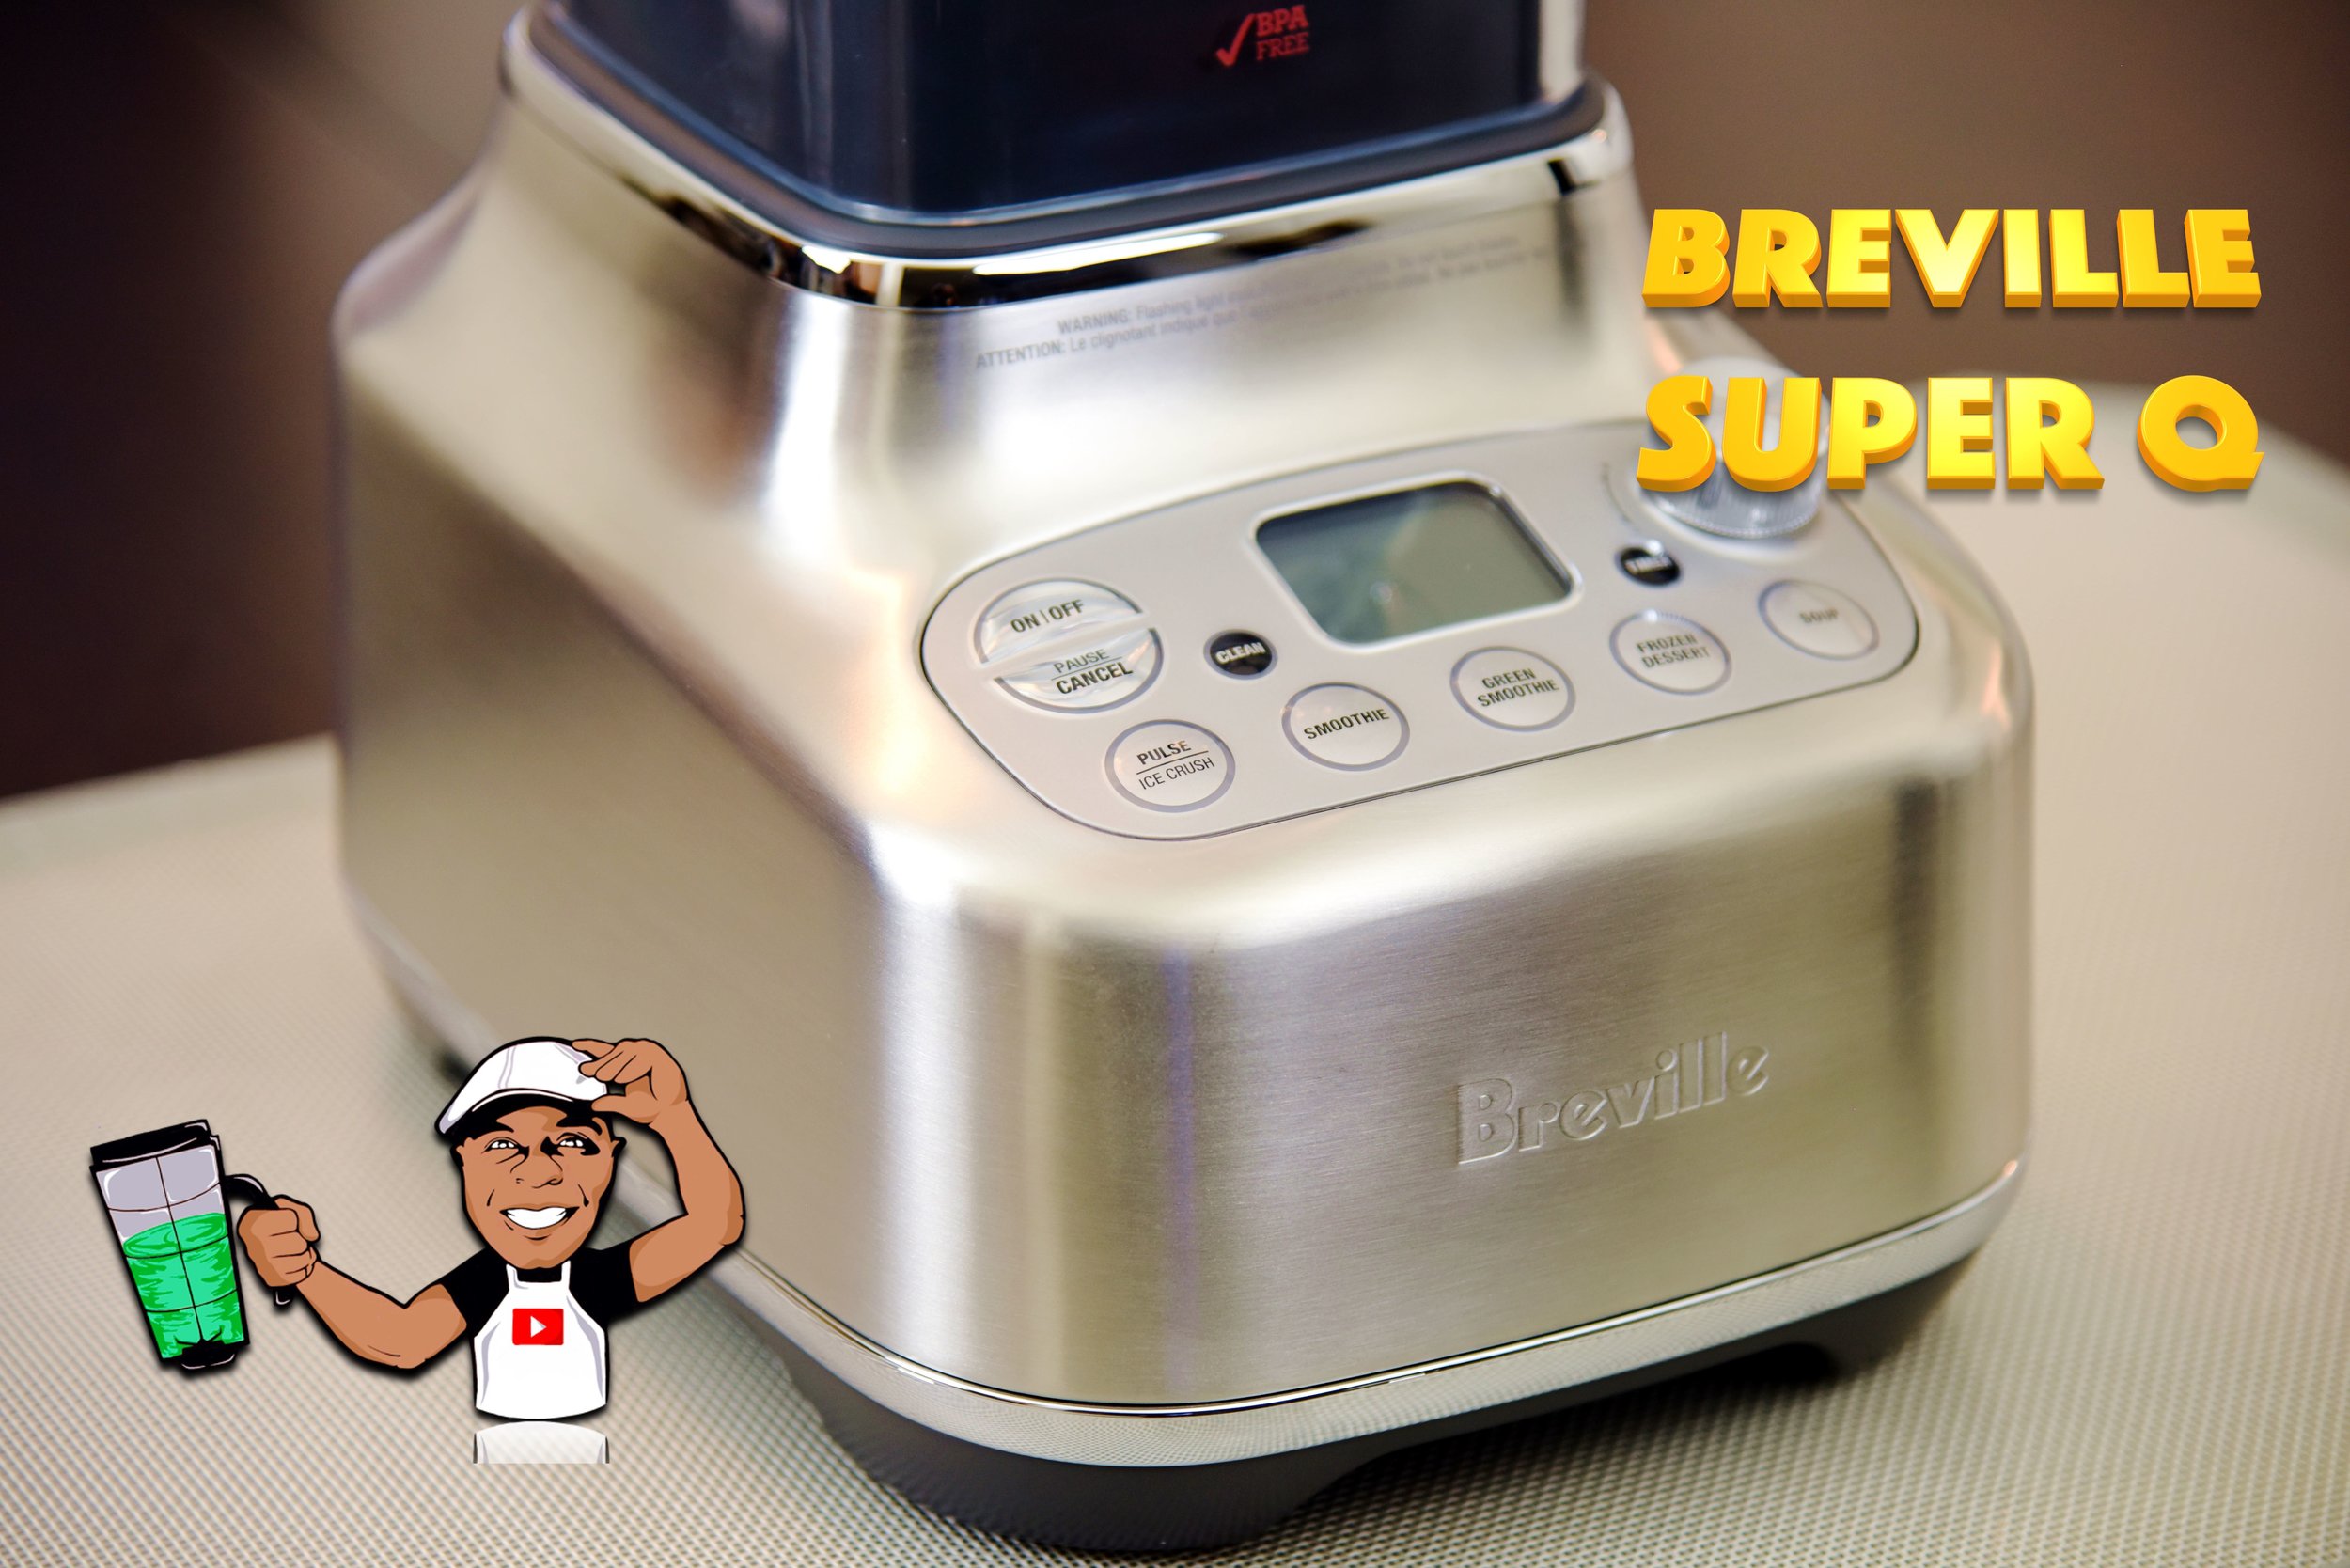 Breville Super Q Blender Review: A Powerful Addition to Your